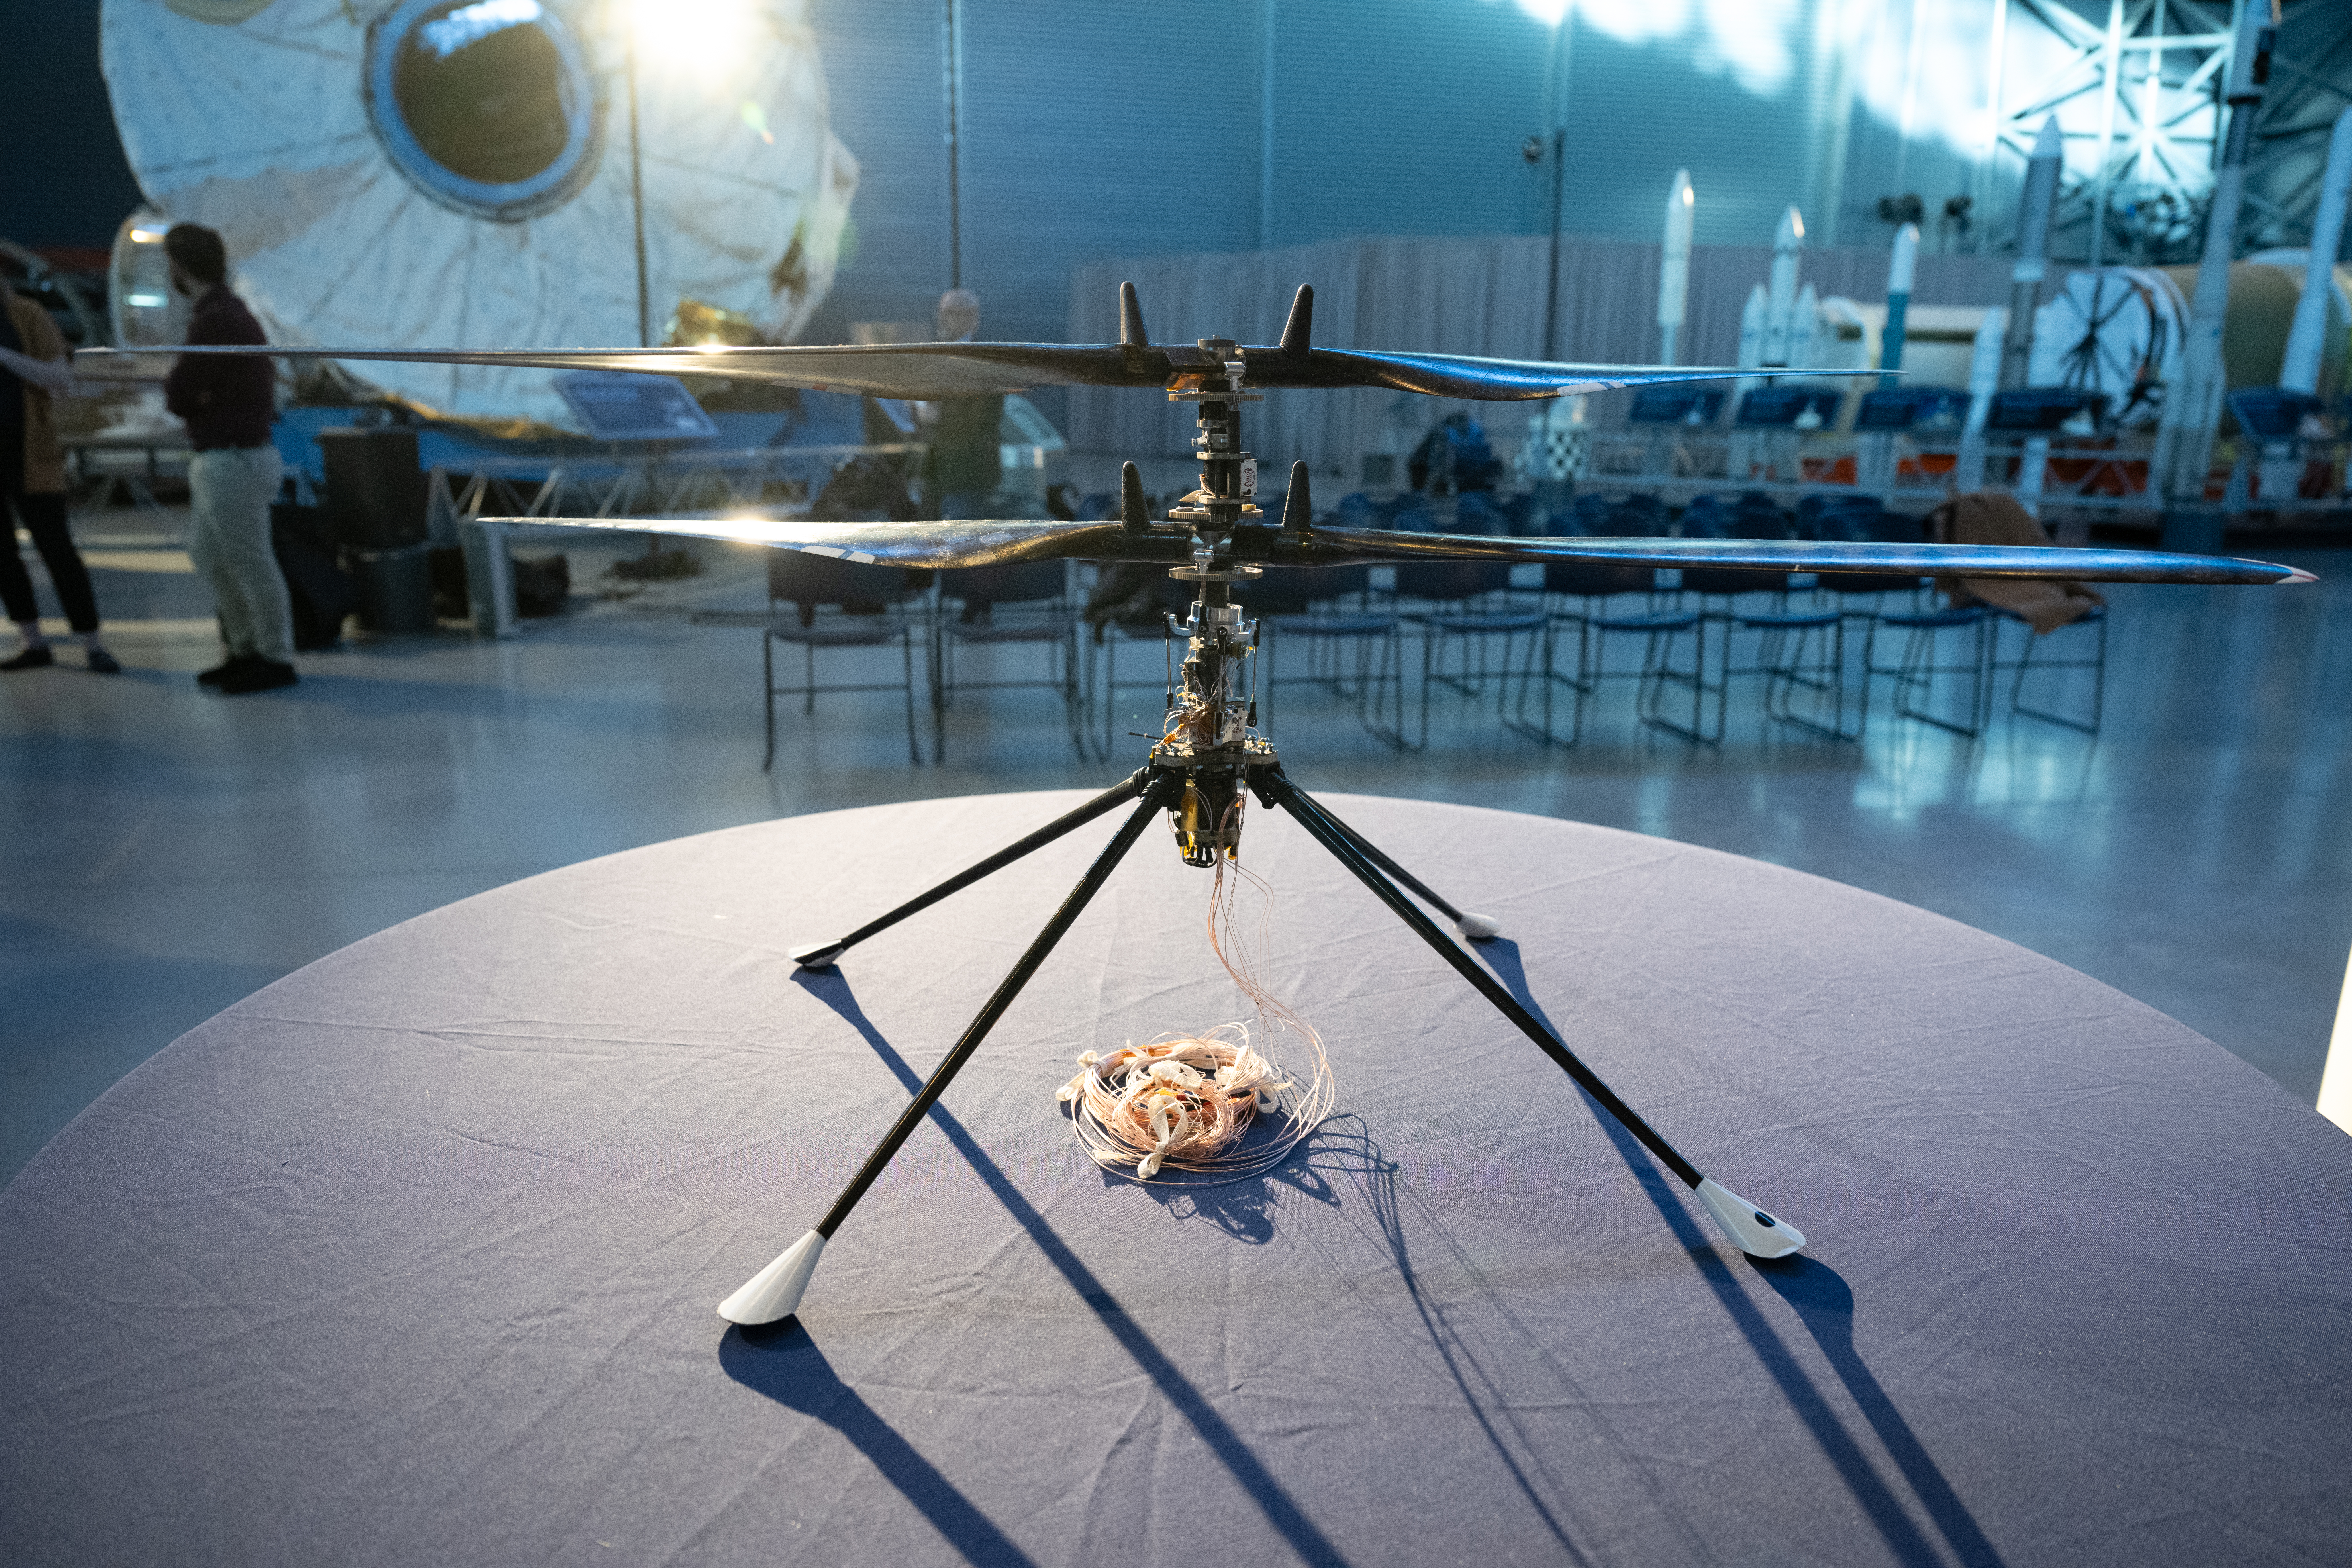 The Ingenuity Mars Helicopter prototype sits on a round, gray surface. Sunlight glints off of one of its blades. The blades are stacked vertically on a thin column. Four thin legs with white tips are attached to the column. A bundle of wires protrudes from the helicopter and rests on the table.